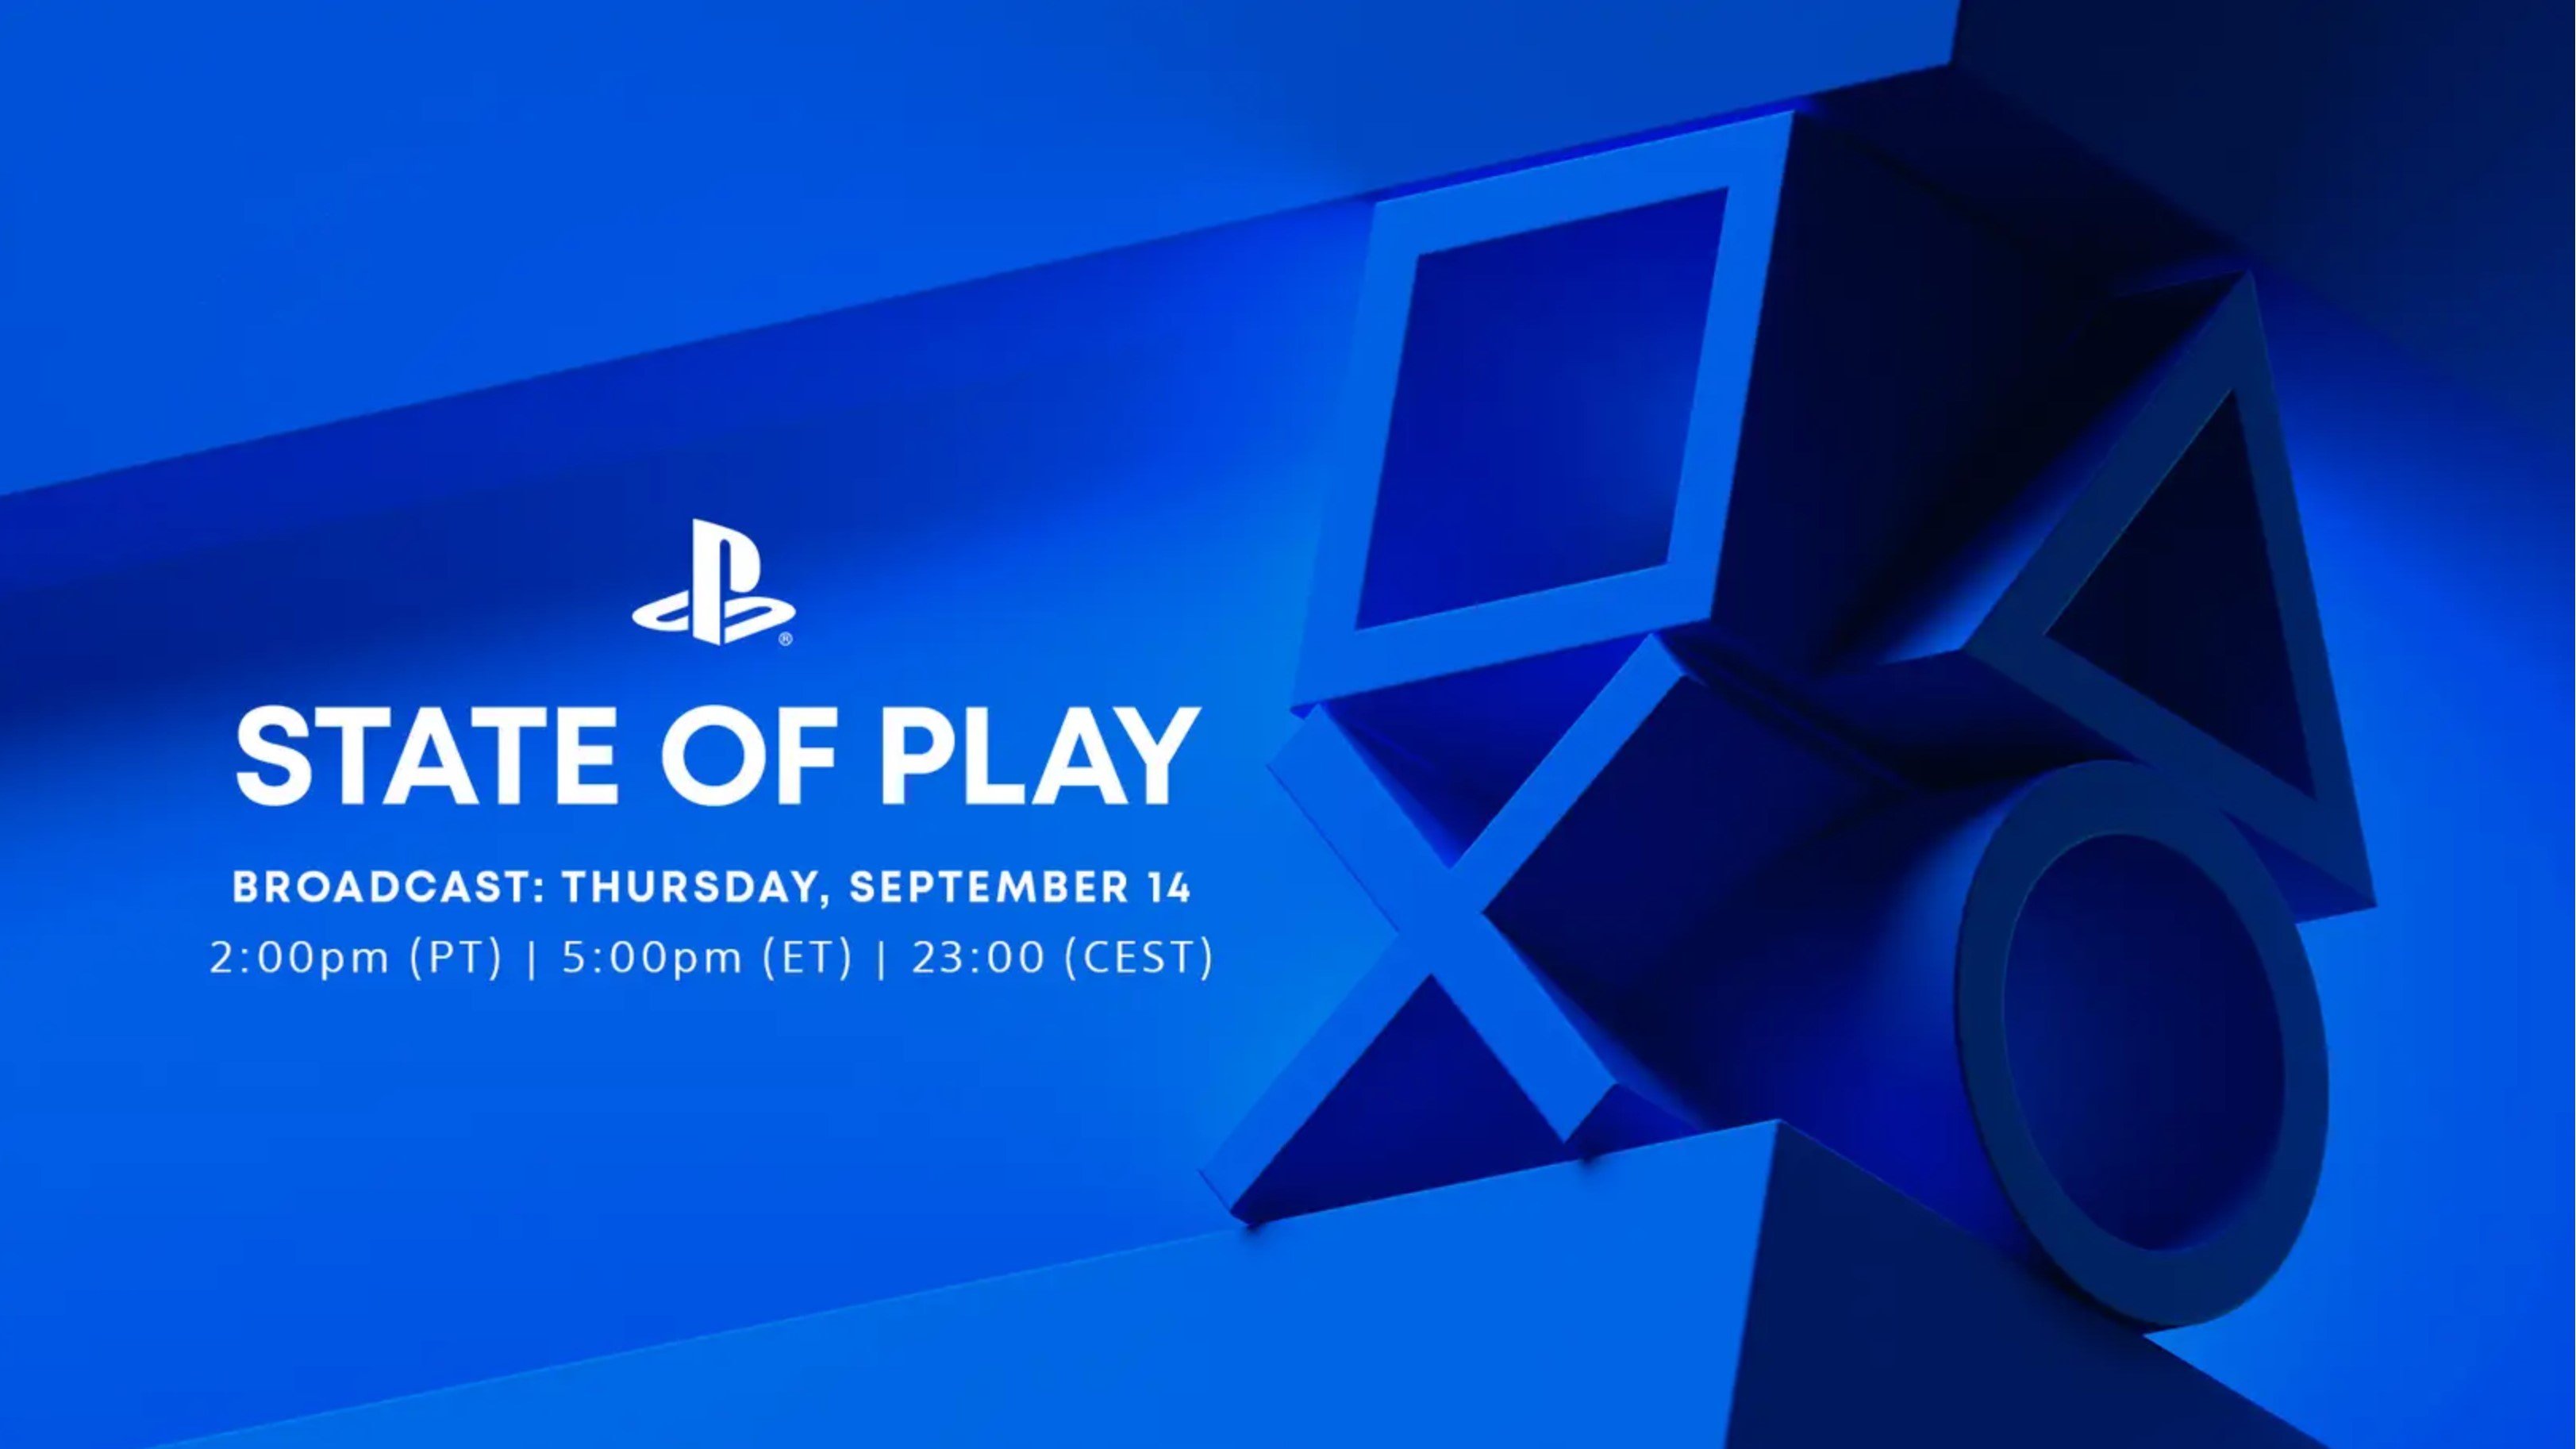 Reports suggest PlayStation may hold highly anticipated State of Play event later this week